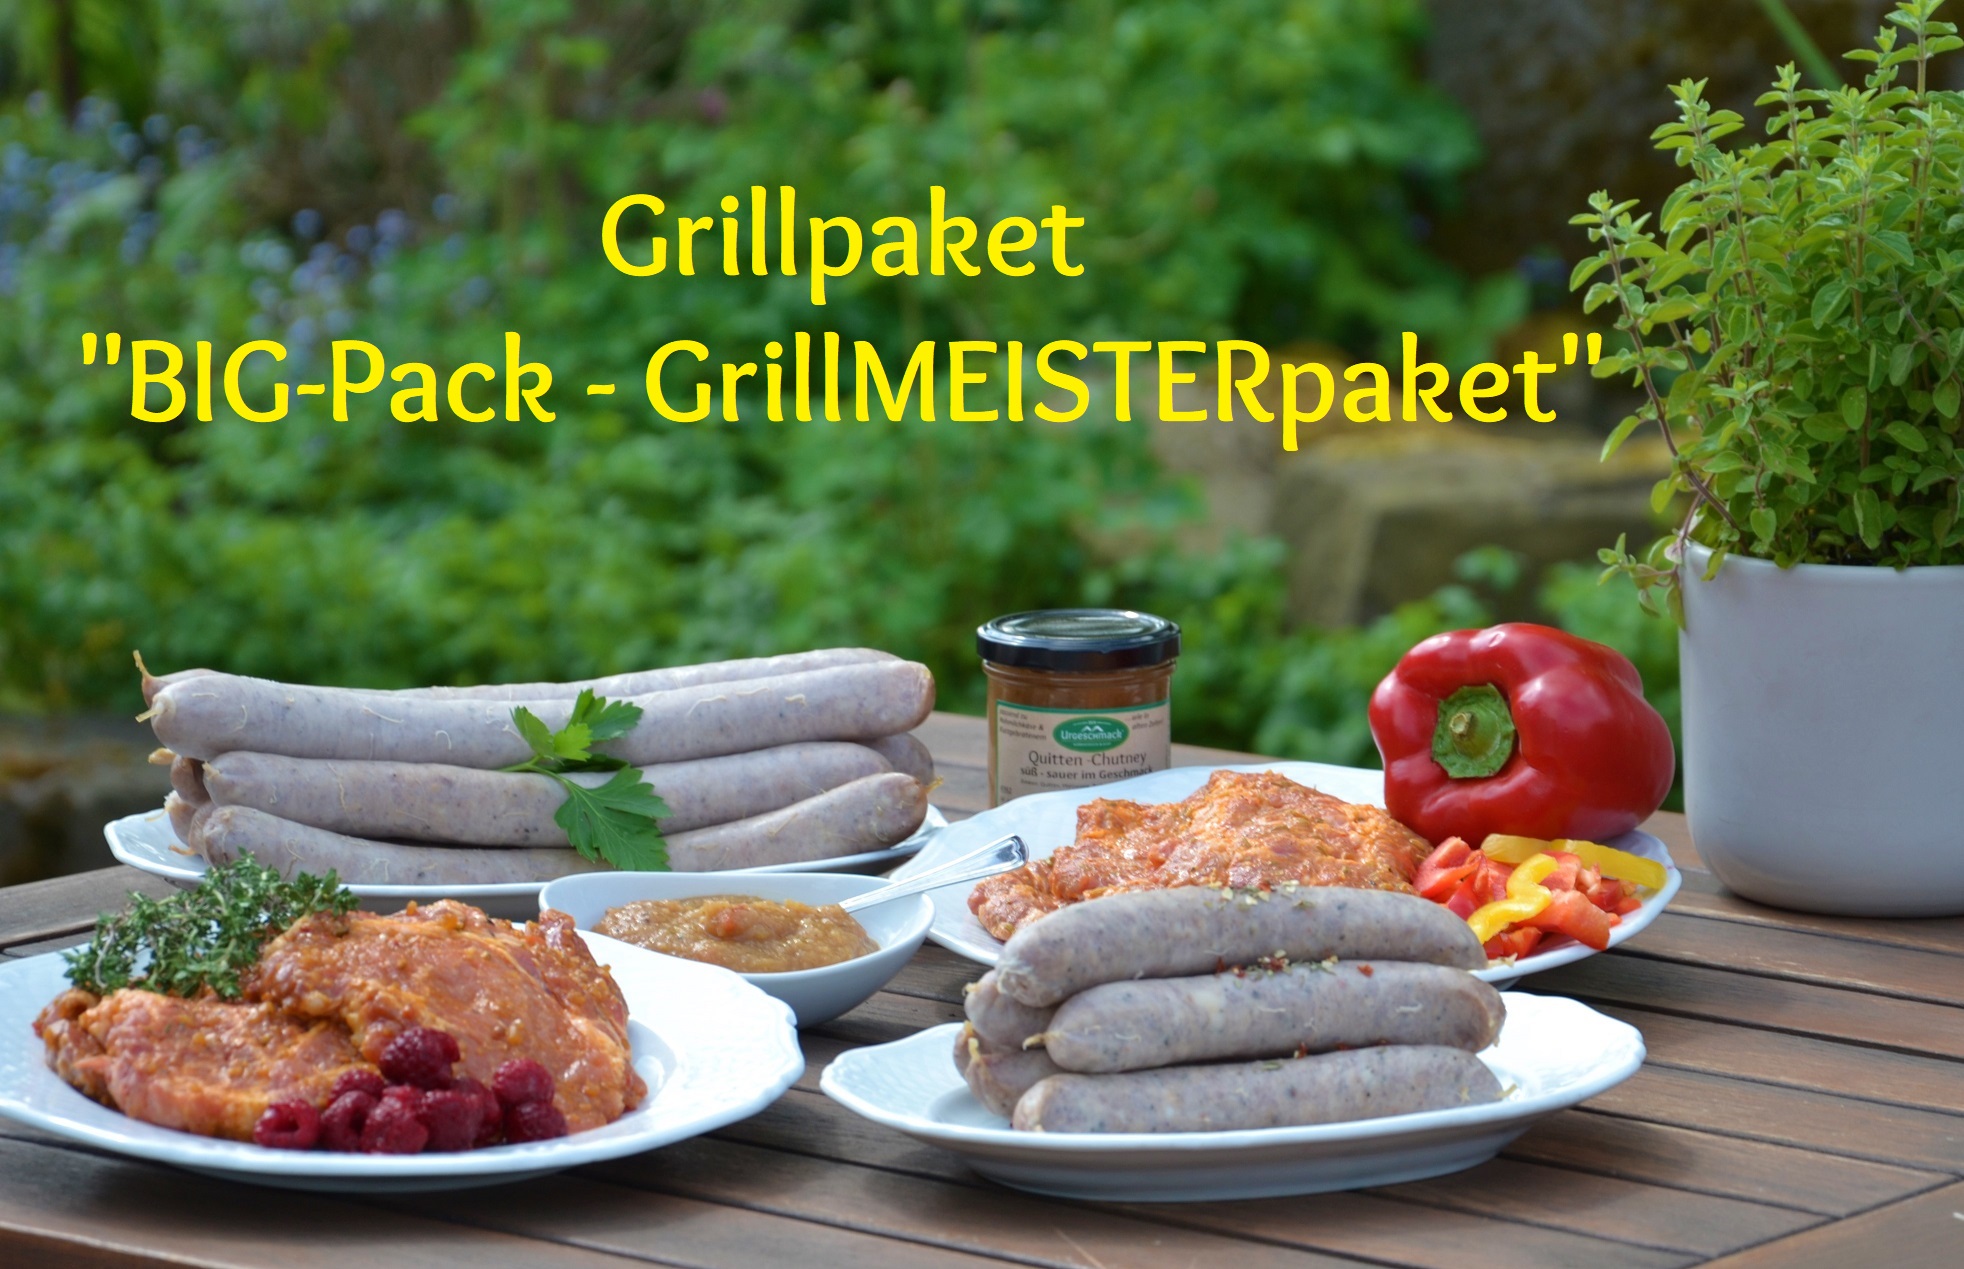 BIG PACK - Grill"Meister"paket